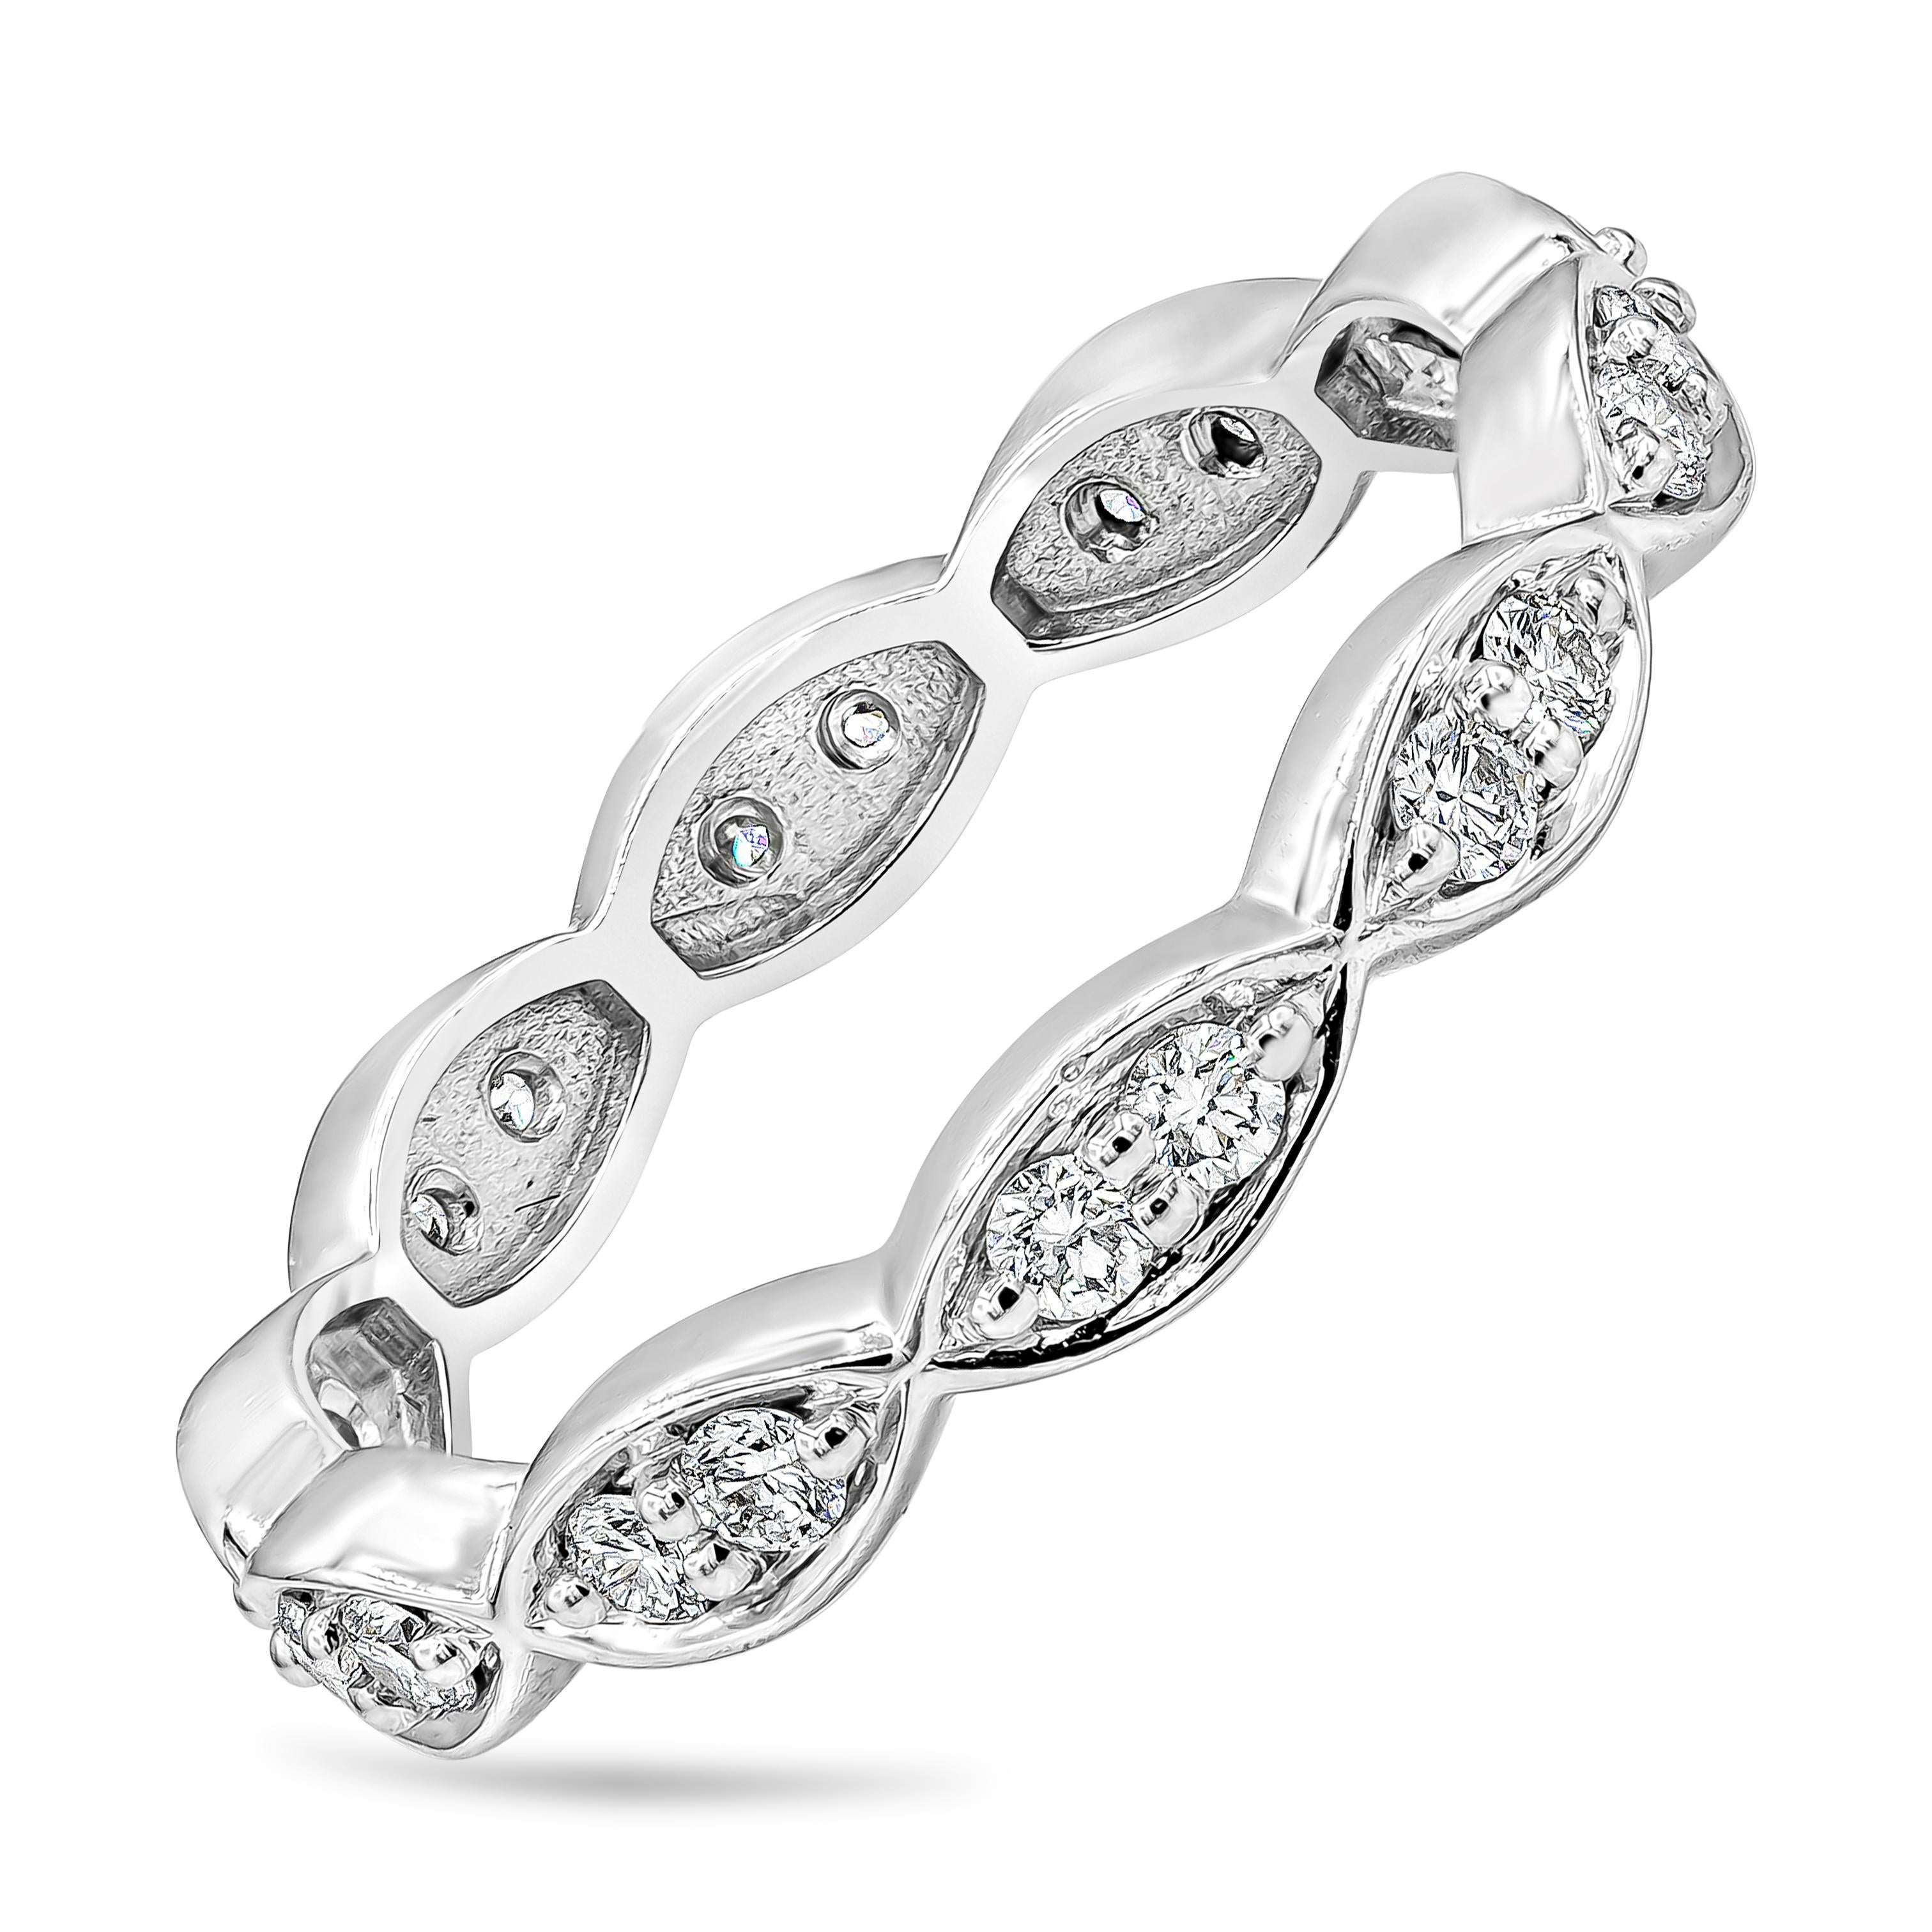 A unique yet stylish wedding band design showcasing dazzling round brilliant diamonds weighing 0.50 carats total. Set in a marquis-shaped design, Made with 14K White Gold. Size 7 US resizable upon request.

Style available in different sizes and